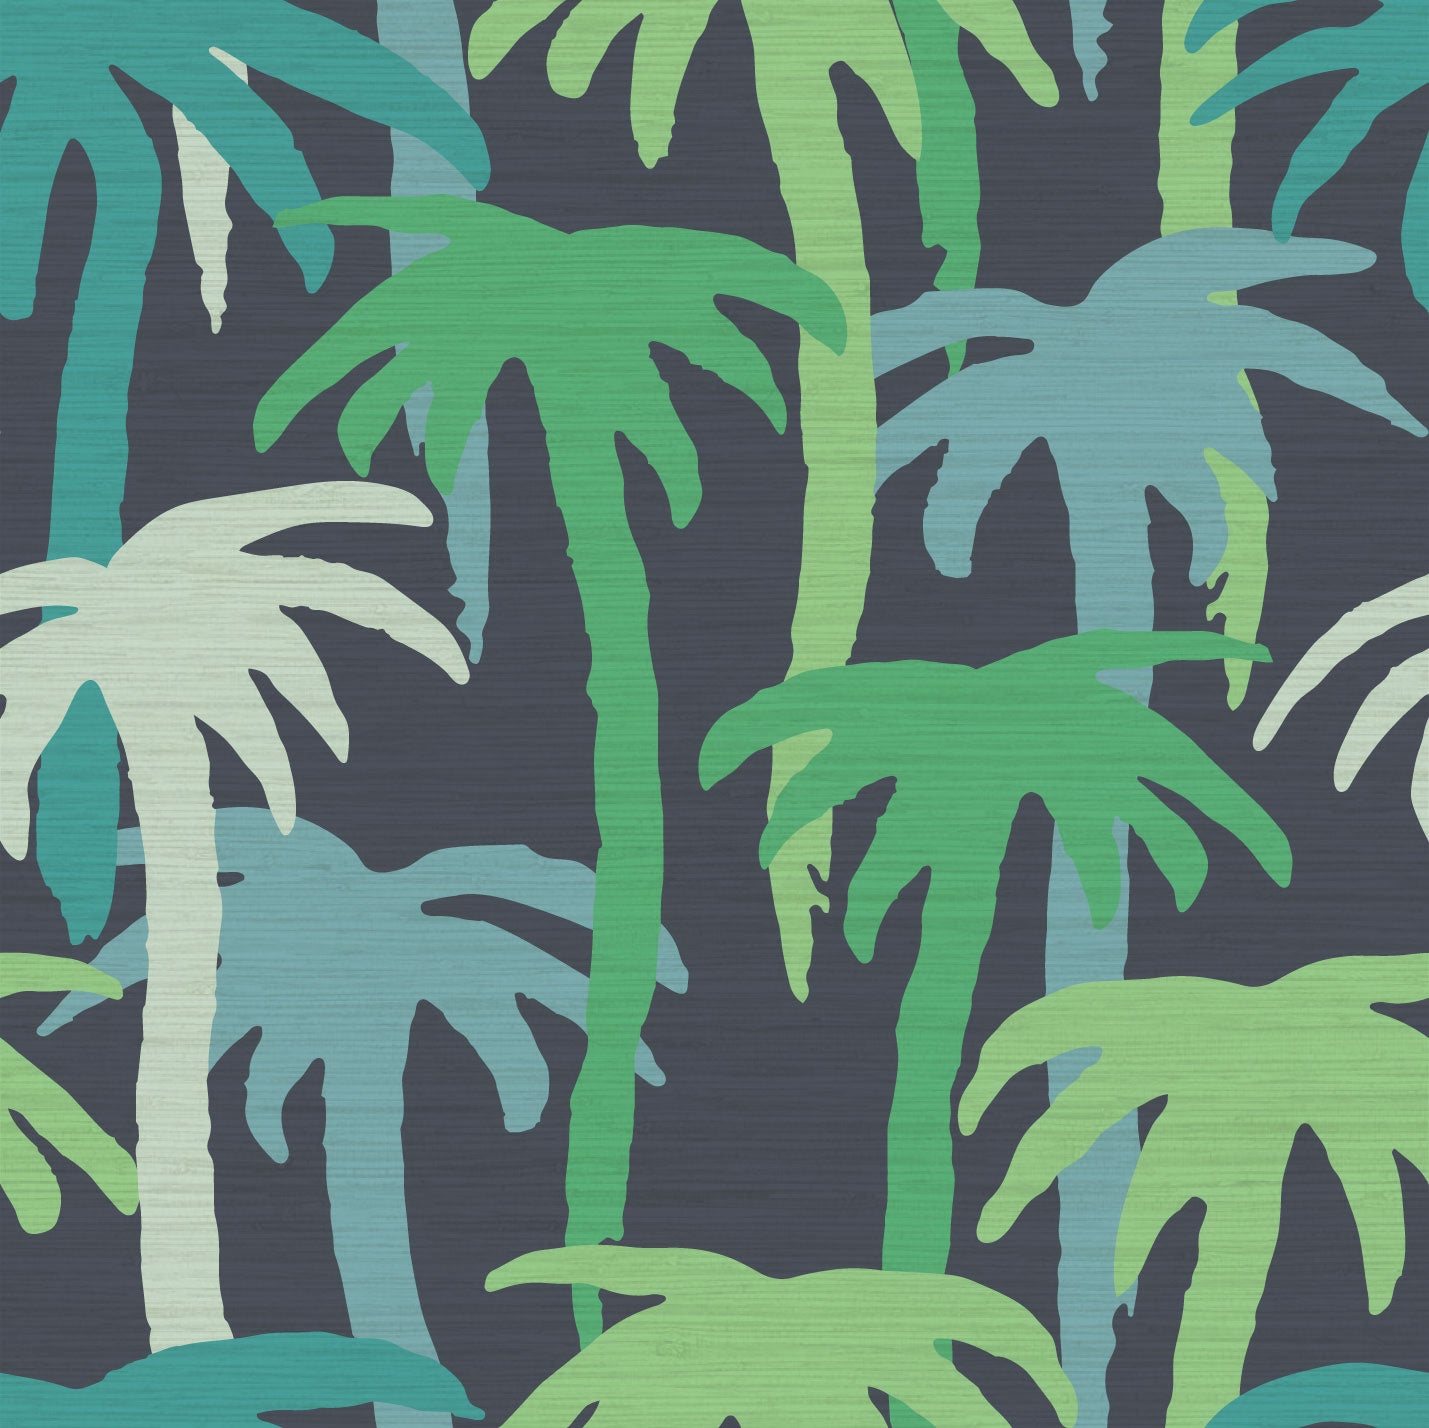 Grasscloth wallpaper Natural Textured Eco-Friendly Non-toxic High-quality  Sustainable Interior Design Bold Custom Tailor-made Retro chic Bold Tropical Jungle Coastal Garden Seaside Coastal Seashore Waterfront Vacation home styling Retreat Relaxed beach vibes Beach cottage Shoreline Oceanfront palm tree '90s surf graphic navy green kelly teal mint 